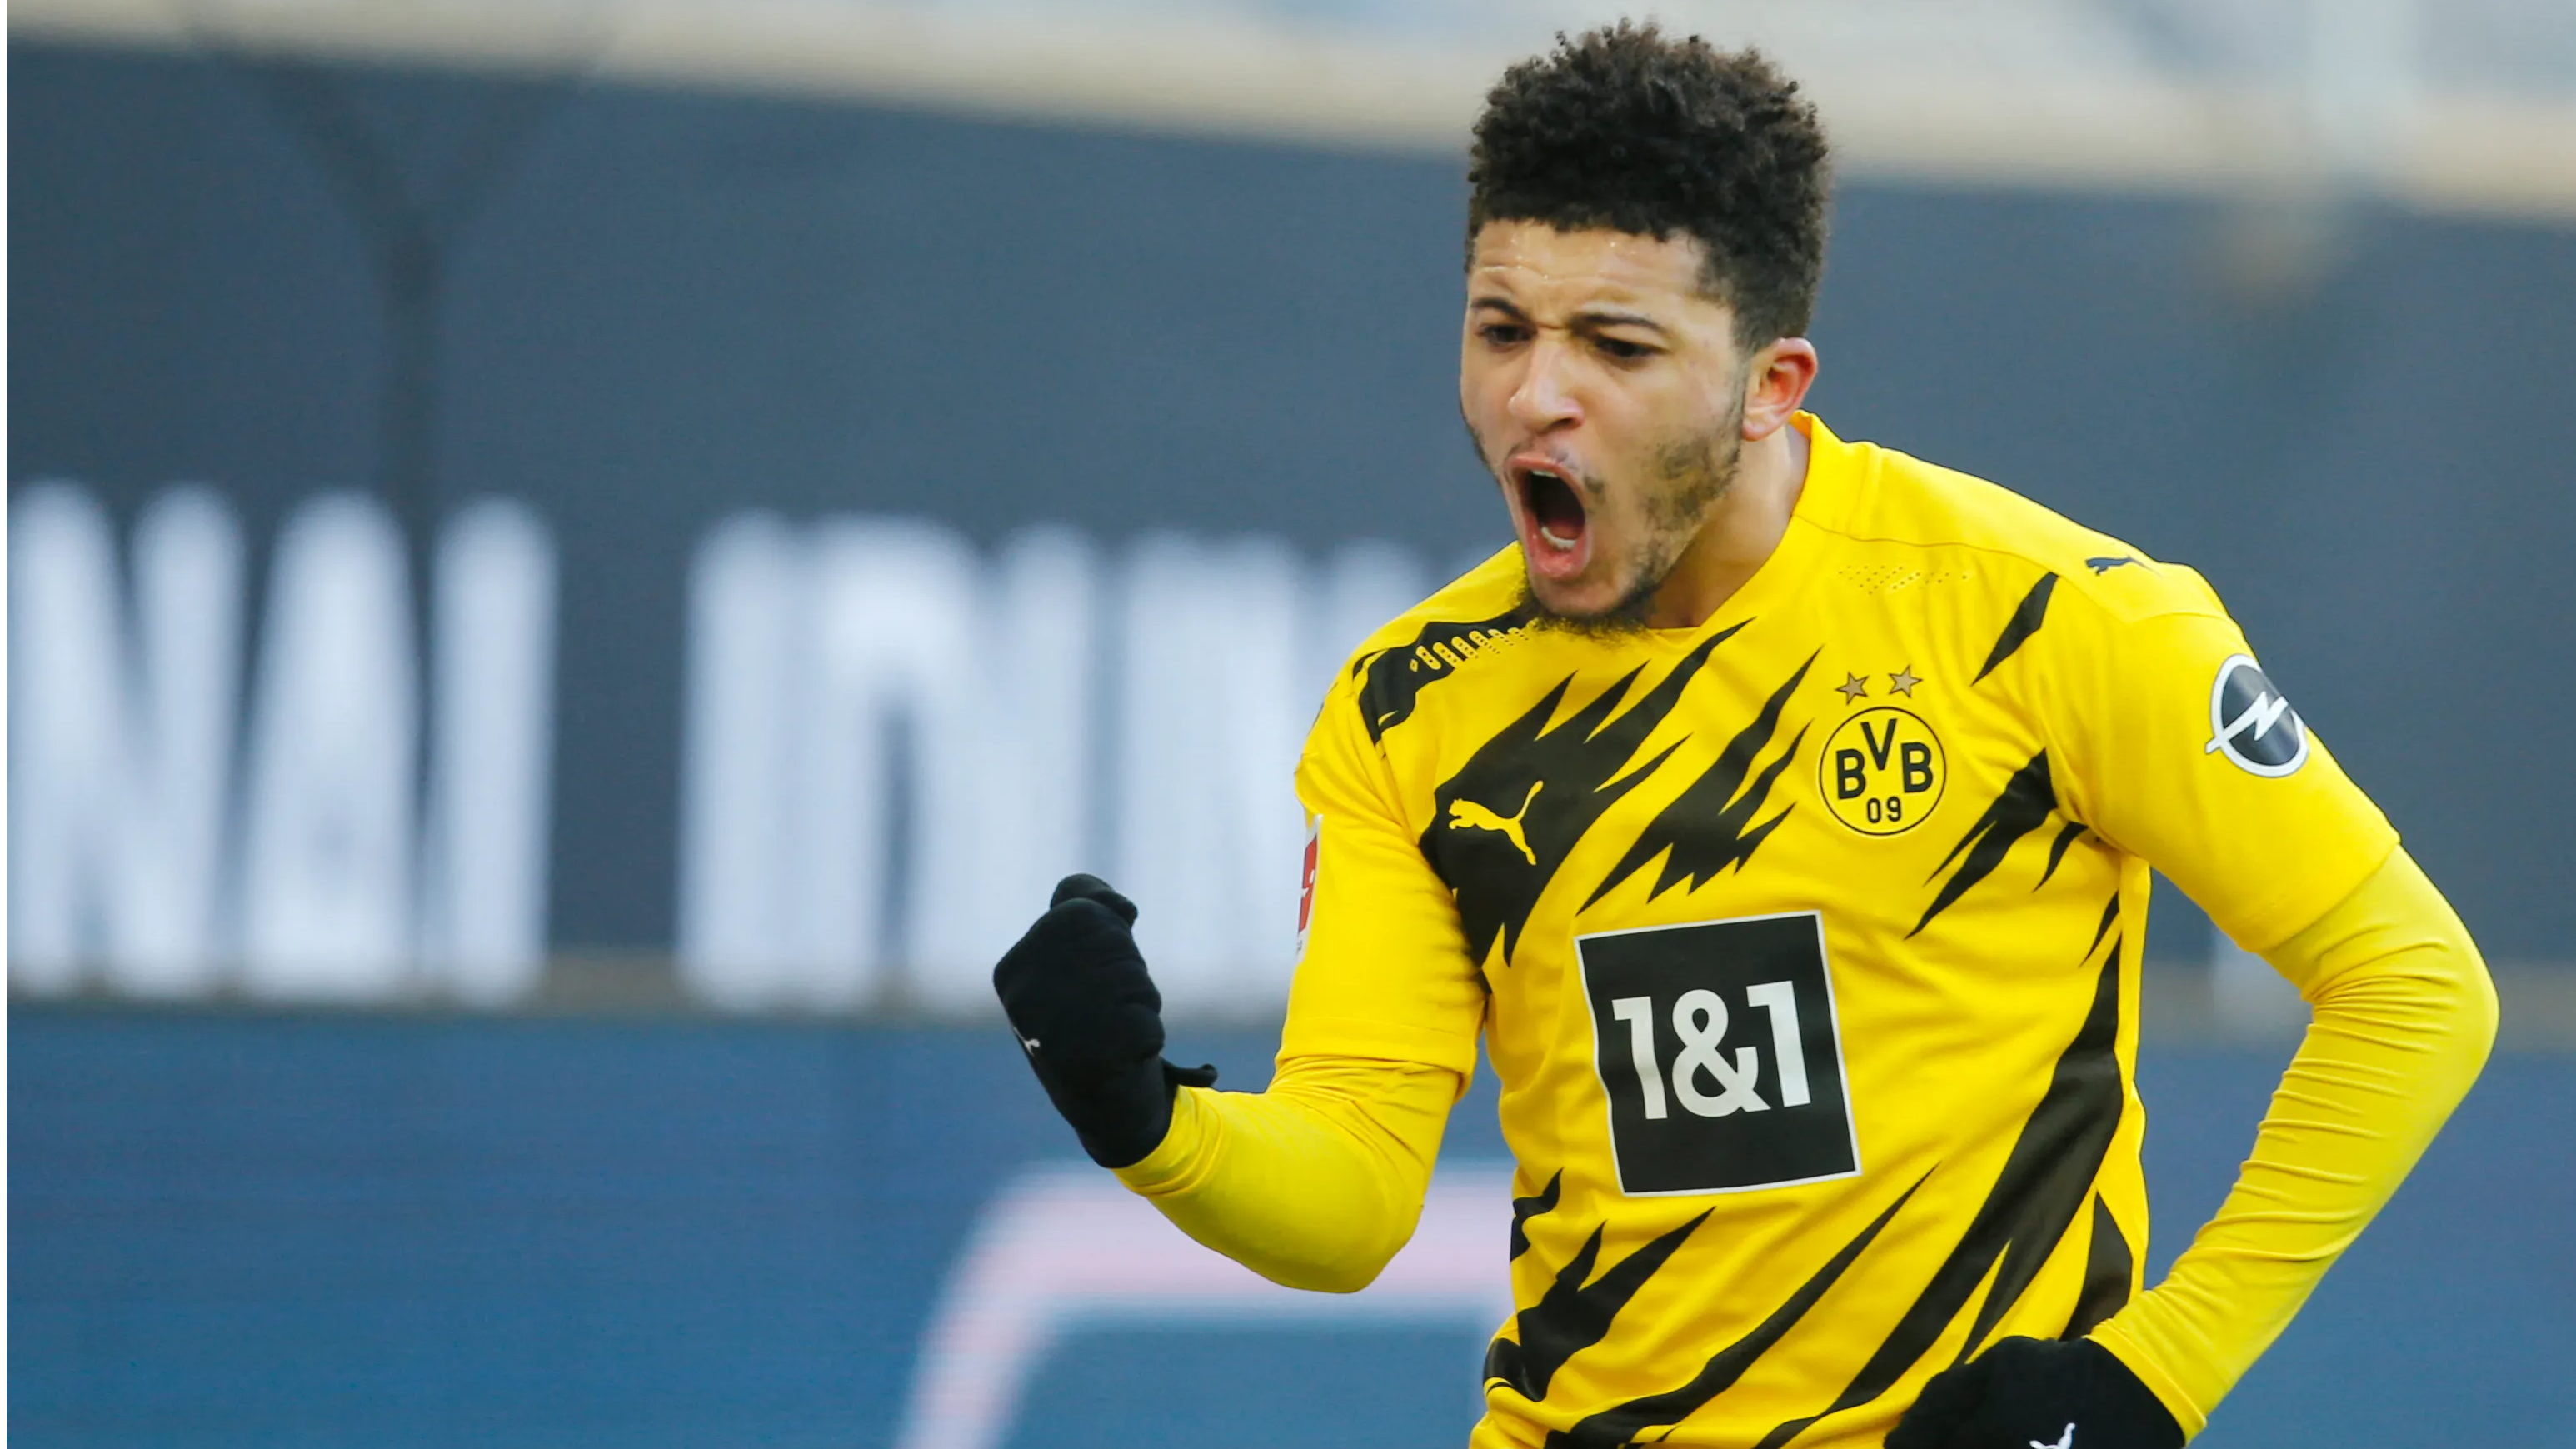 Is Jadon Sancho the answer to Manchester United’s attacking woes?